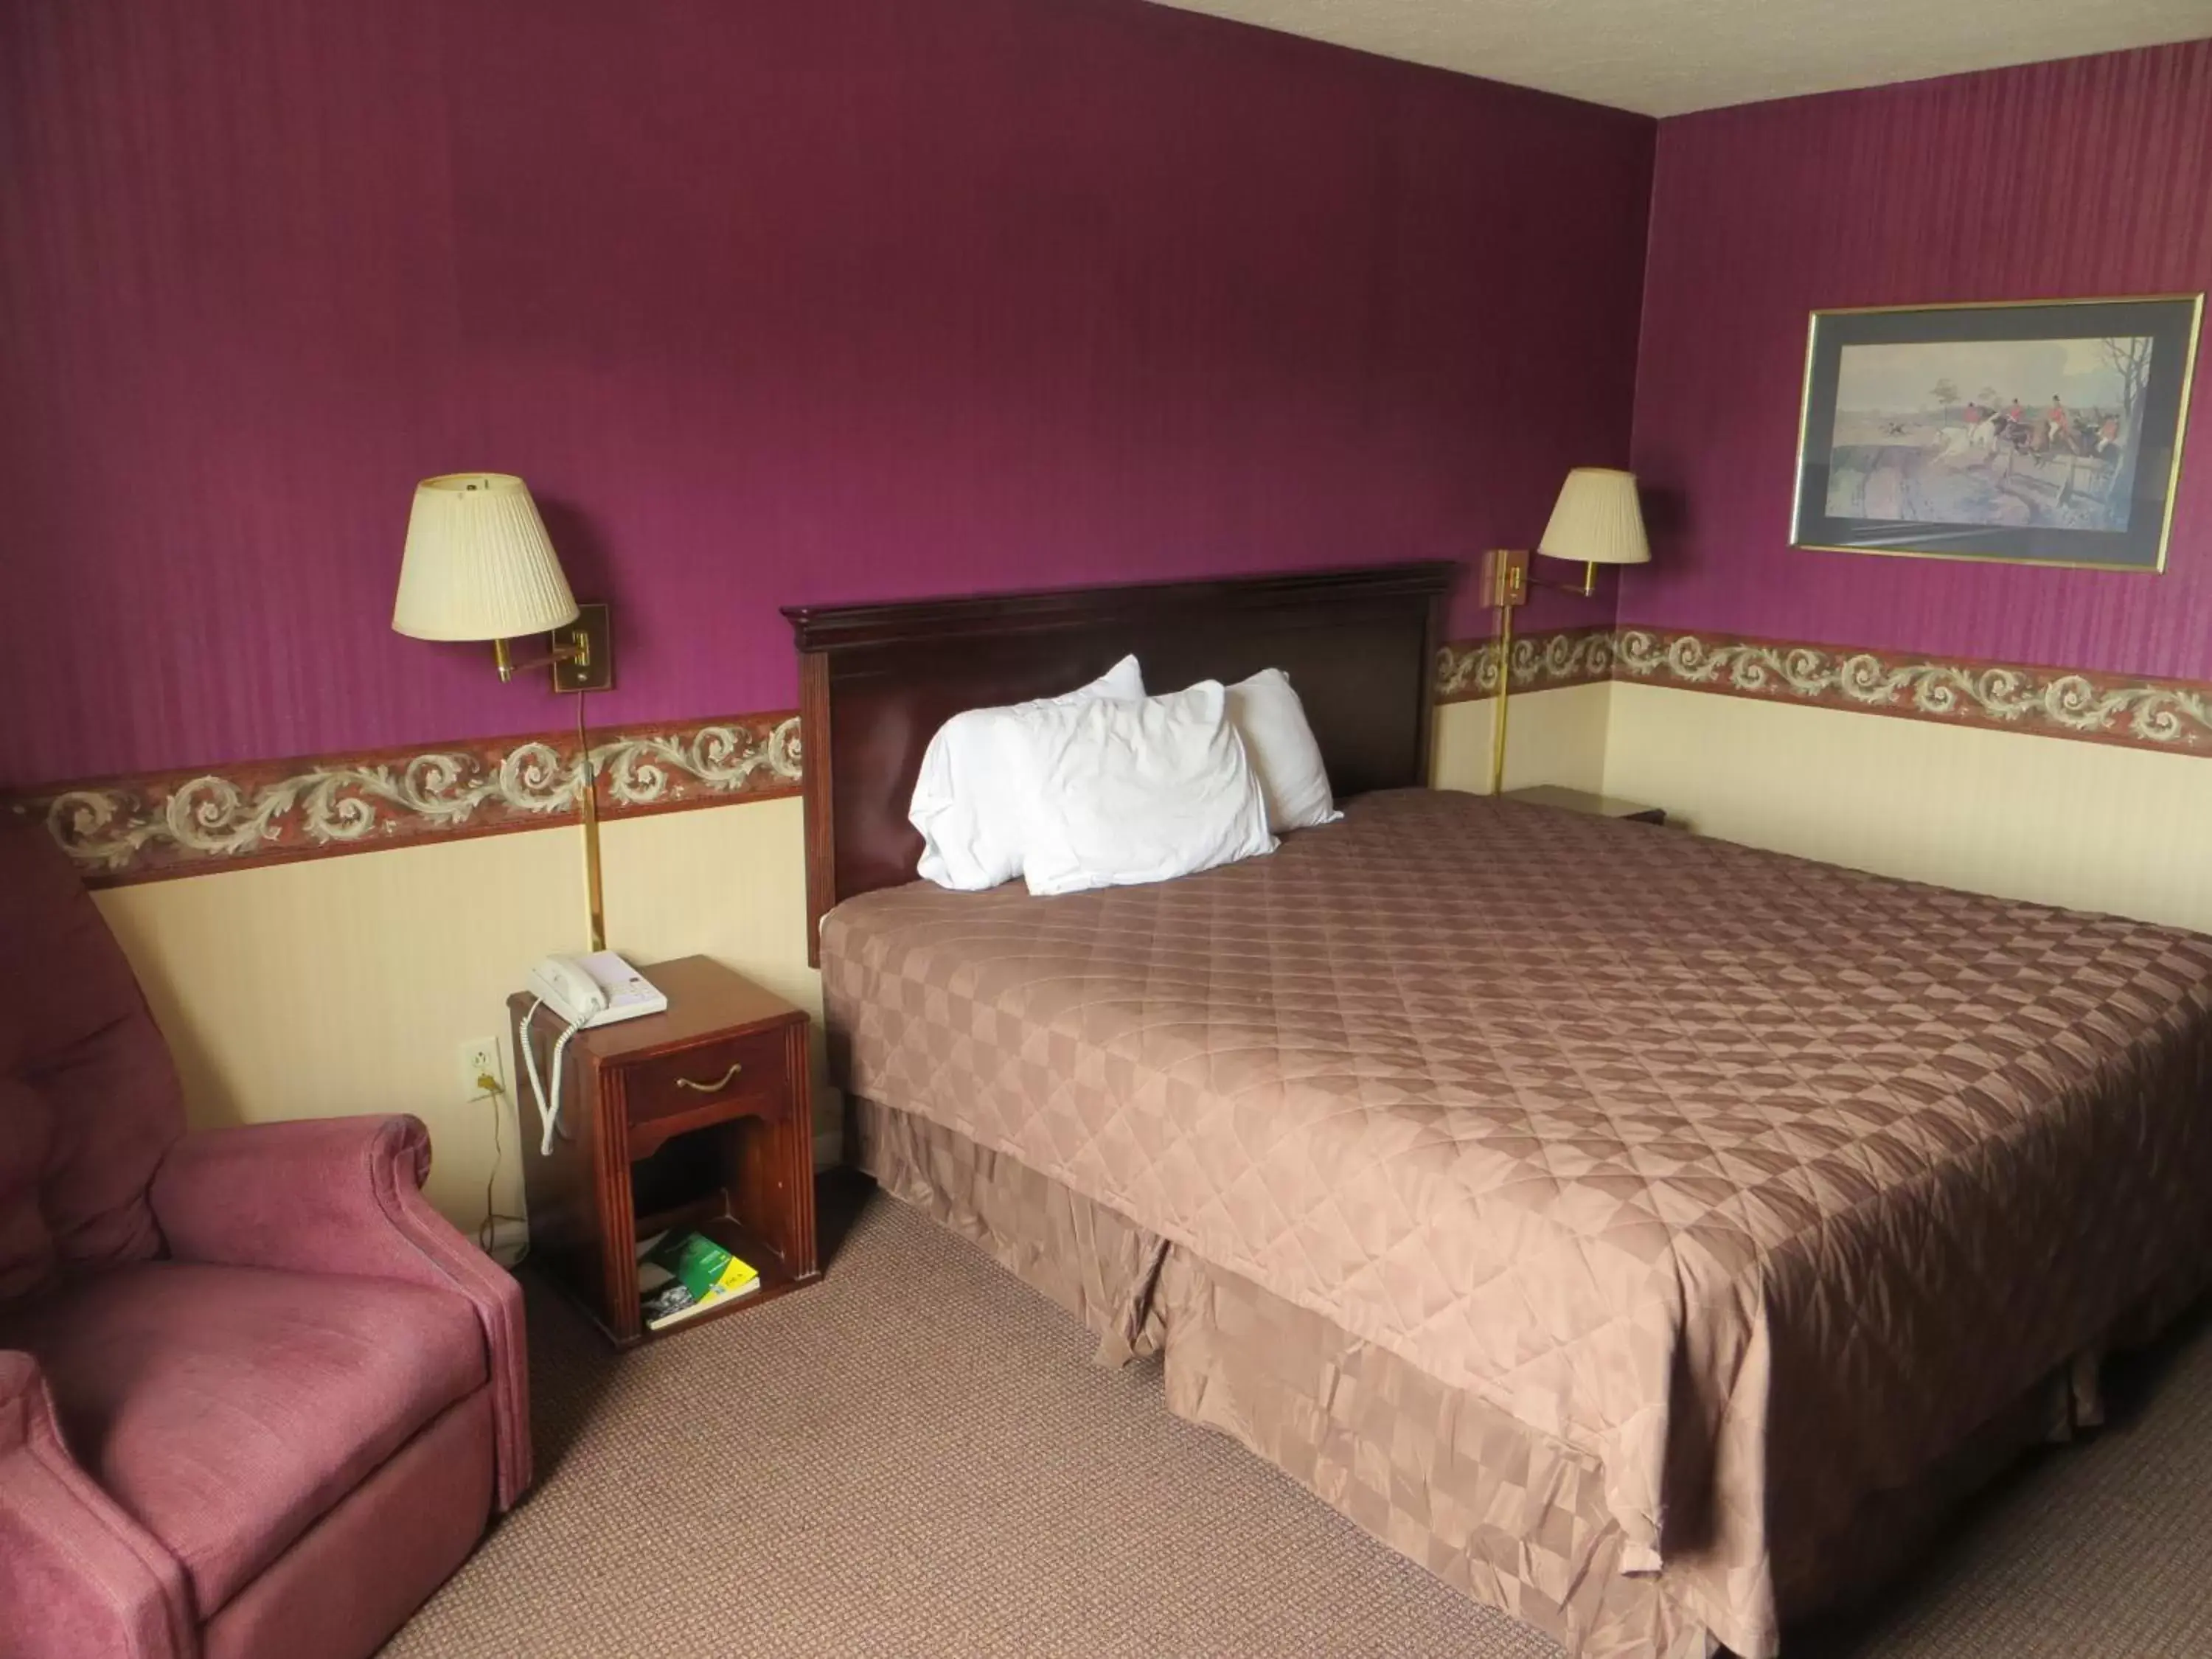 Bed in Americourt Hotel and Suites - Elizabethton